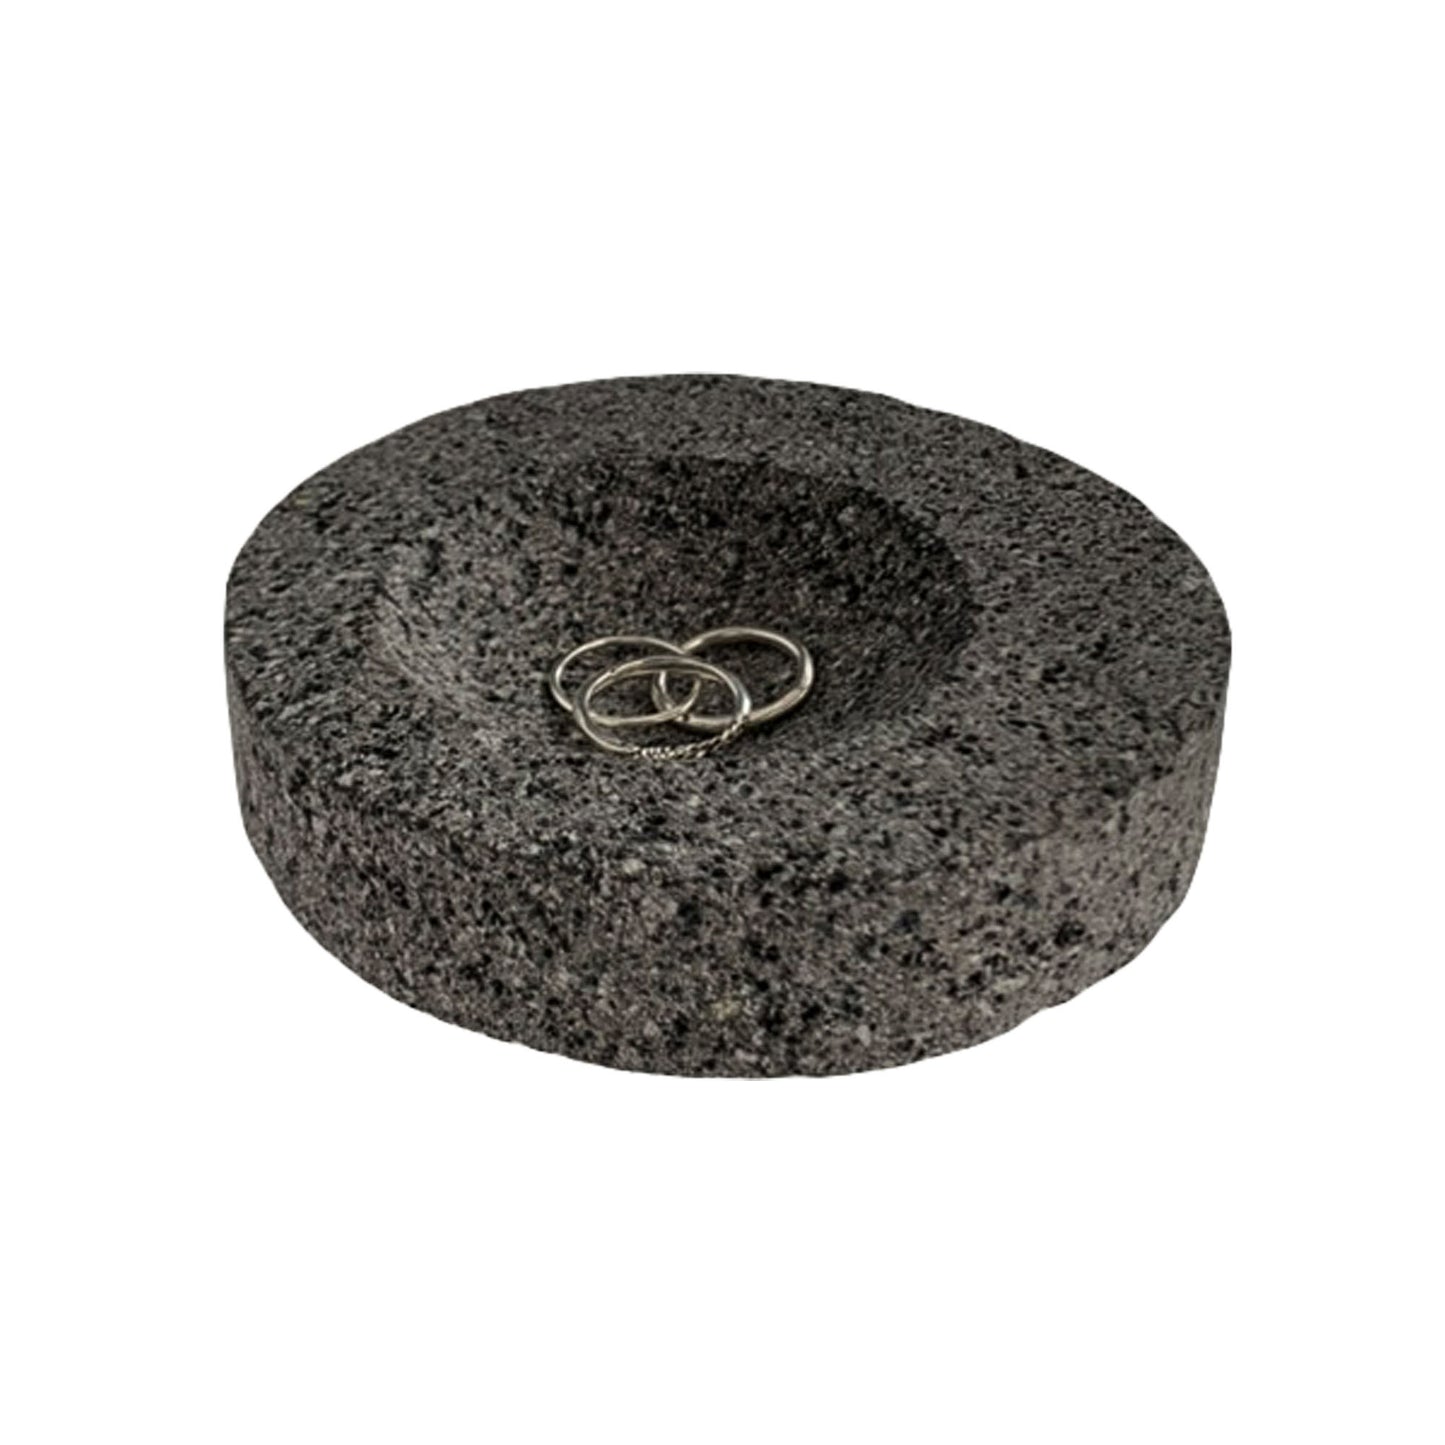 Volcanic Stone Catchall | Ashtray | Salt Cellar | Incense Holder - Hand Carved in Mexico